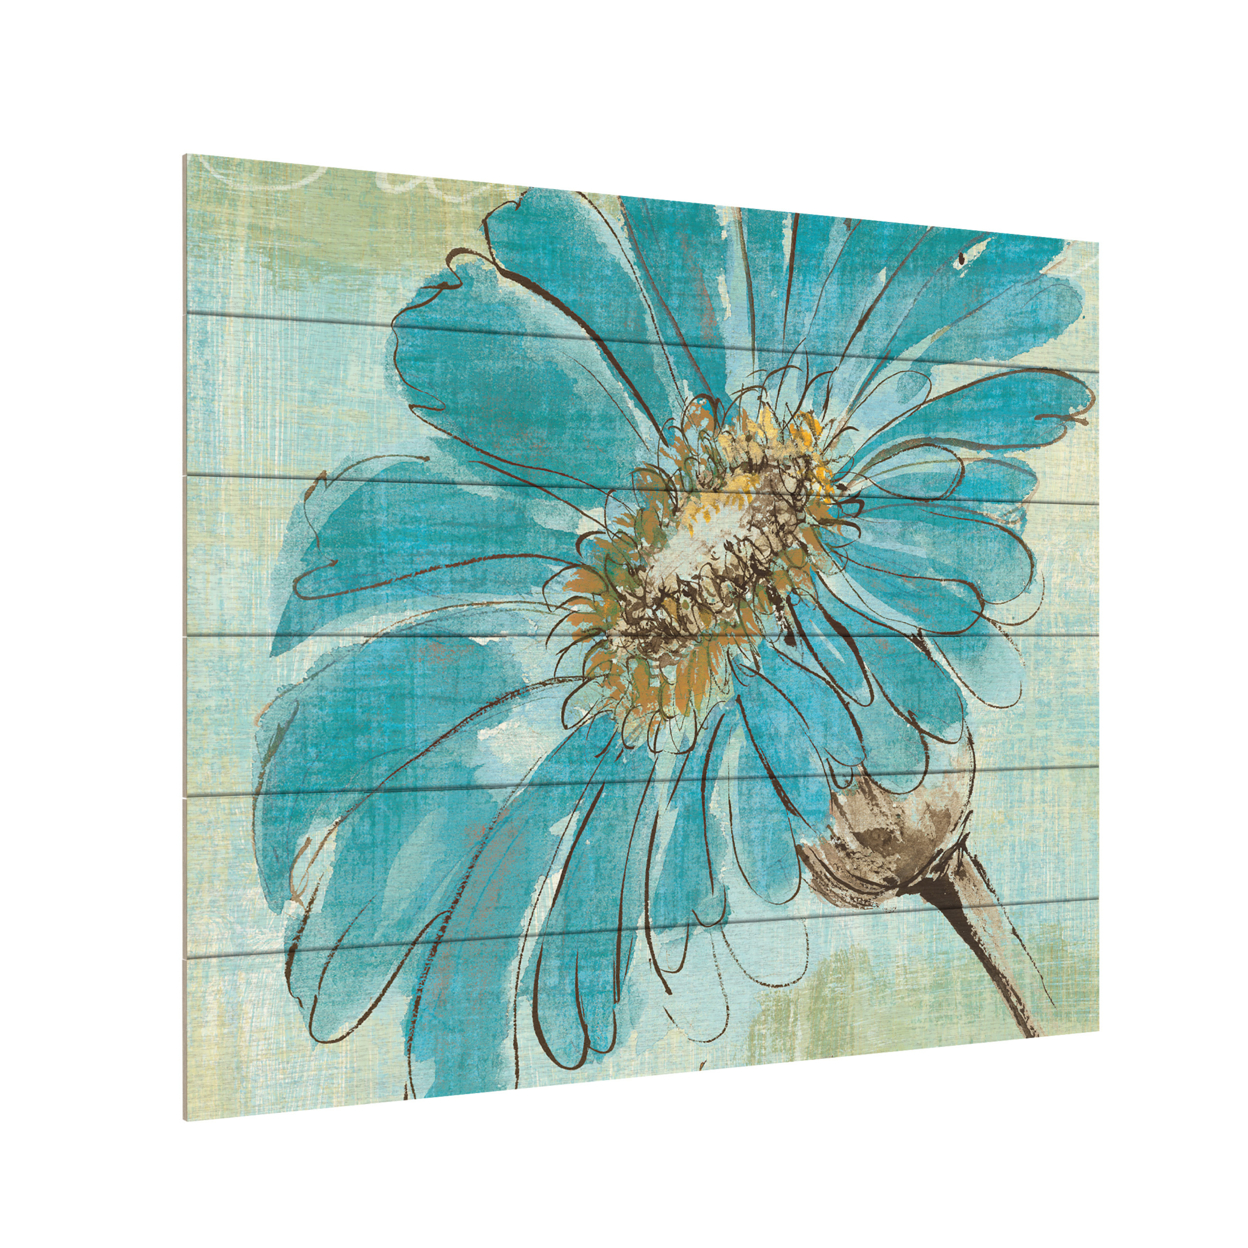 Wooden Slat Art 18 X 22 Inches Titled Spa Daisies II Ready To Hang Home Decor Picture